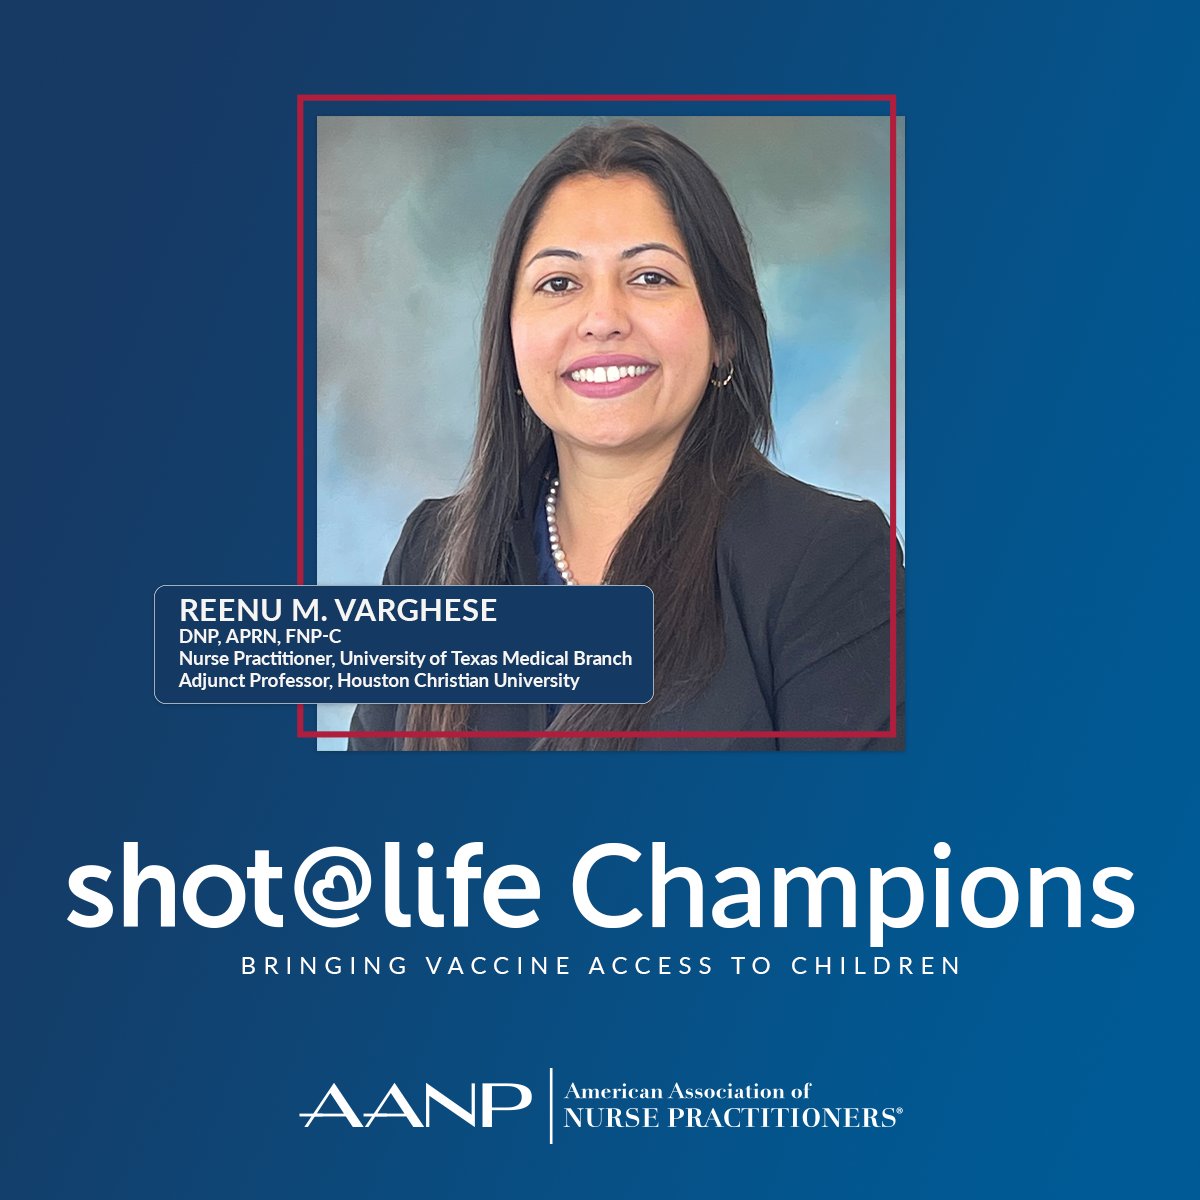 Shot@Life is a campaign created to promote vaccine access to all children. Learn about the experience of being a @shotatlife champion from NP Reenu M. Varghese, and find out how her family history led her to become passionate about childhood vaccination. bit.ly/aanp-shot-life